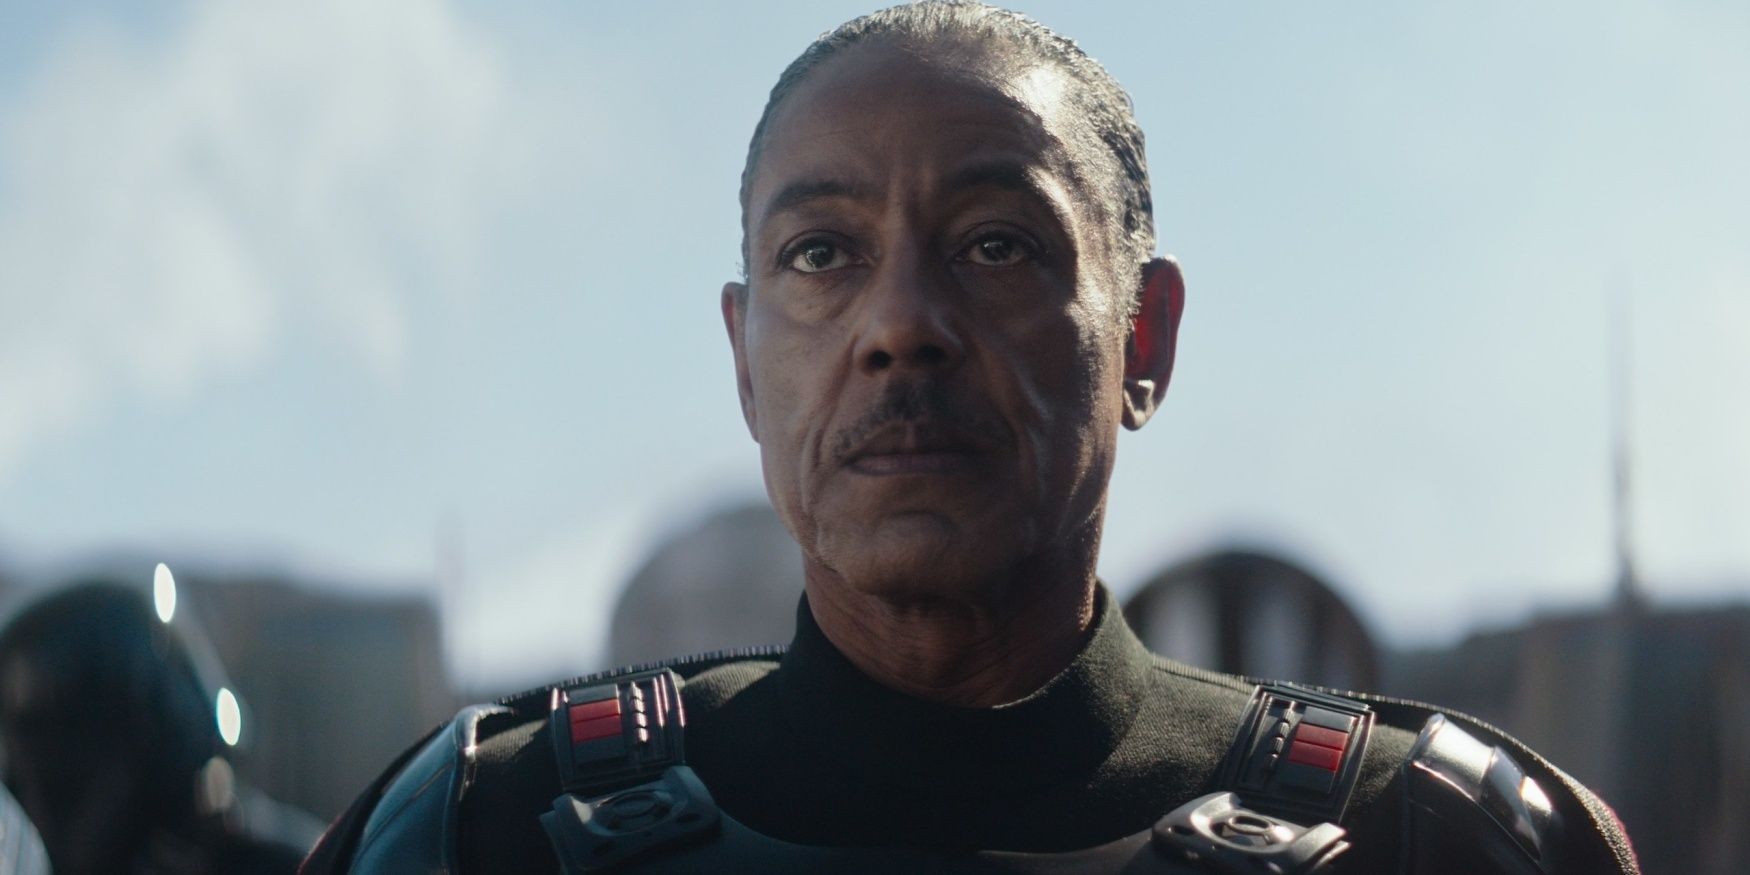 10 Burning Questions We Still Have After Finishing The Mandalorian Season 1